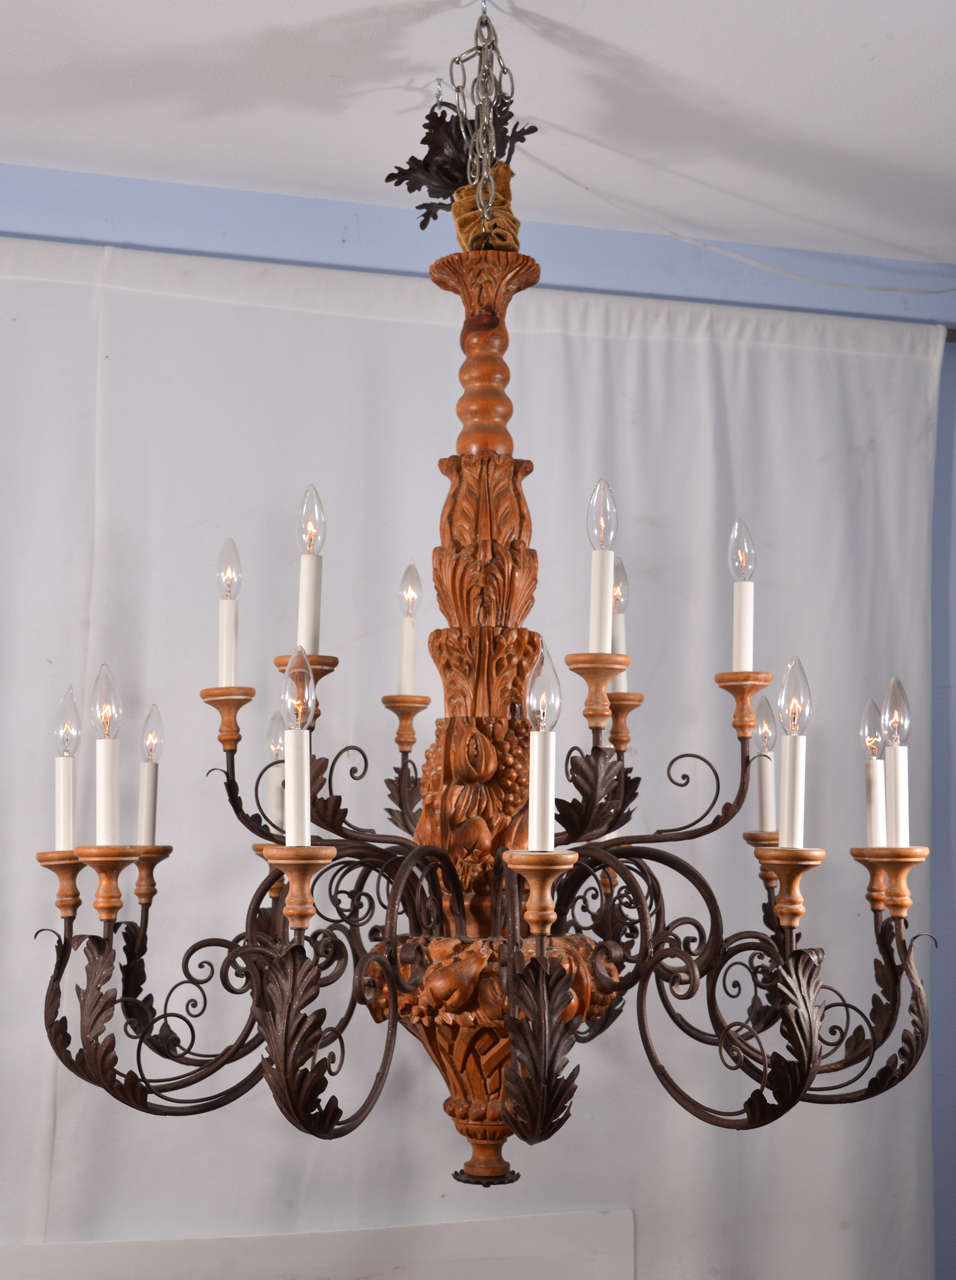 Country French, Hand Carved wooden fruit basket Chandelier.  Intricately fashioned fruit on the fiixture body with graceful scrolling arms adorned with acanthus leaves as the light unit,  Eighteen lights to enhance a large room.  The height of the